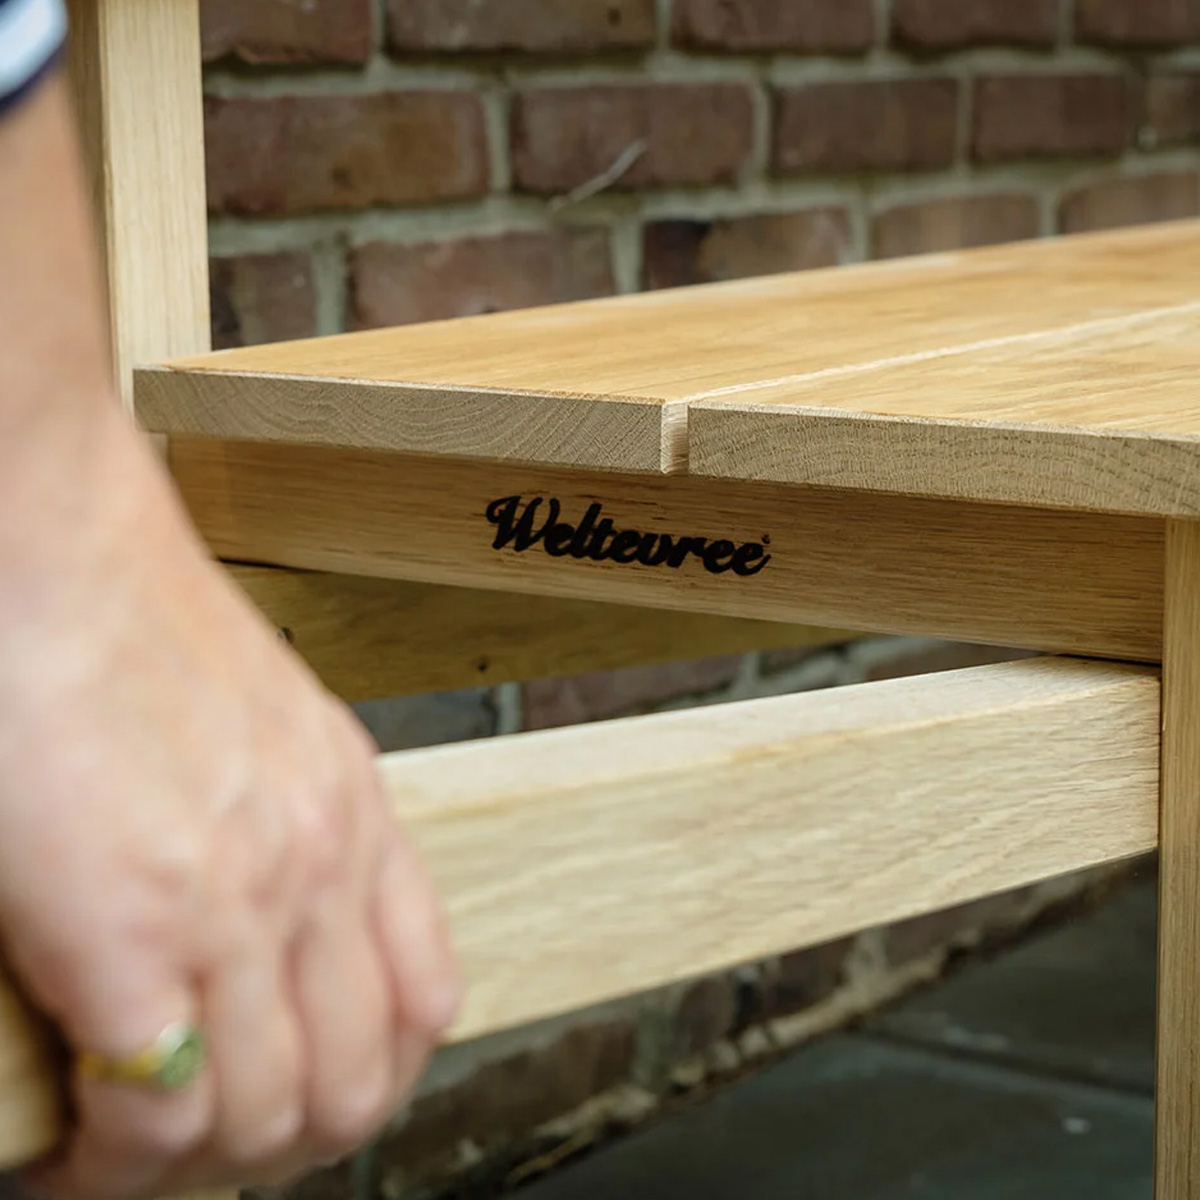 Weltevree Wheelbench, craftsmen carefully process and sand the wood into planks